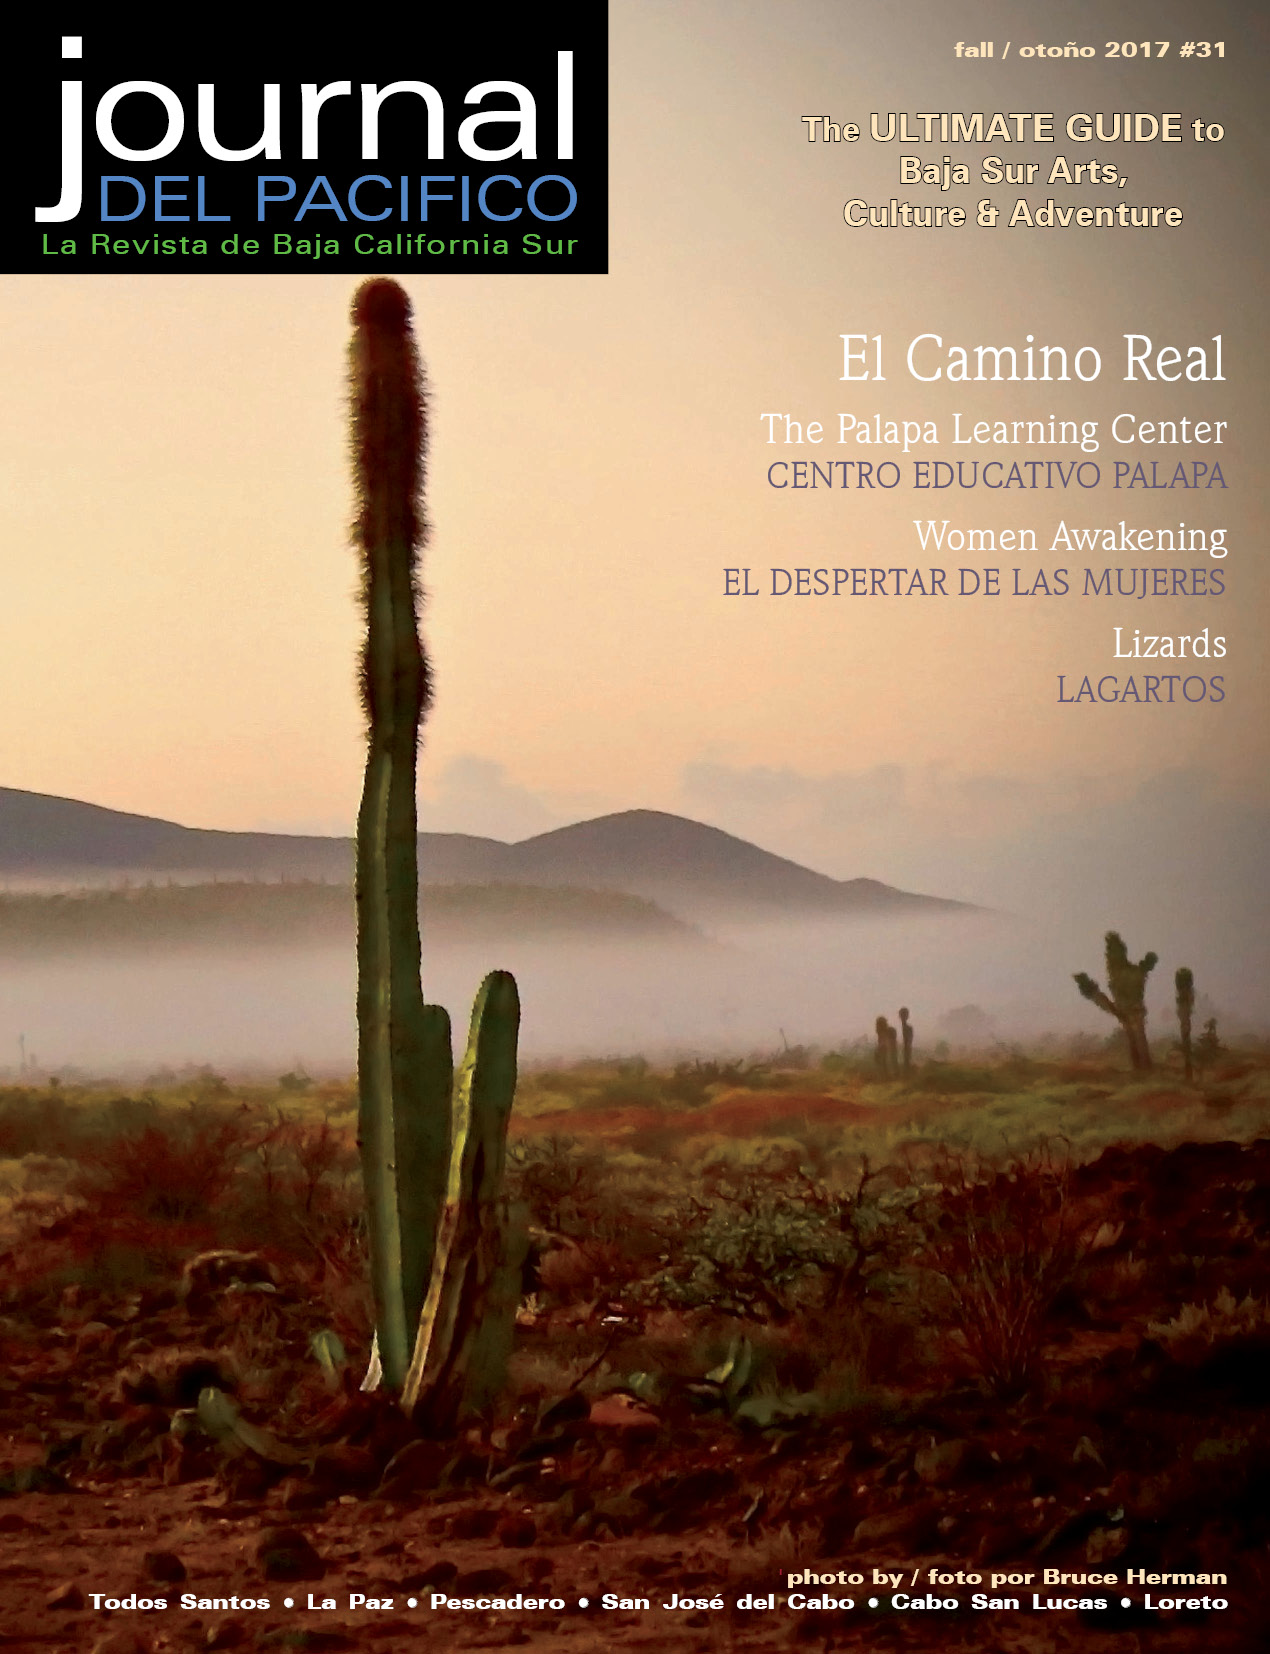 Fall 2017 Issue of Journal del Pacifico